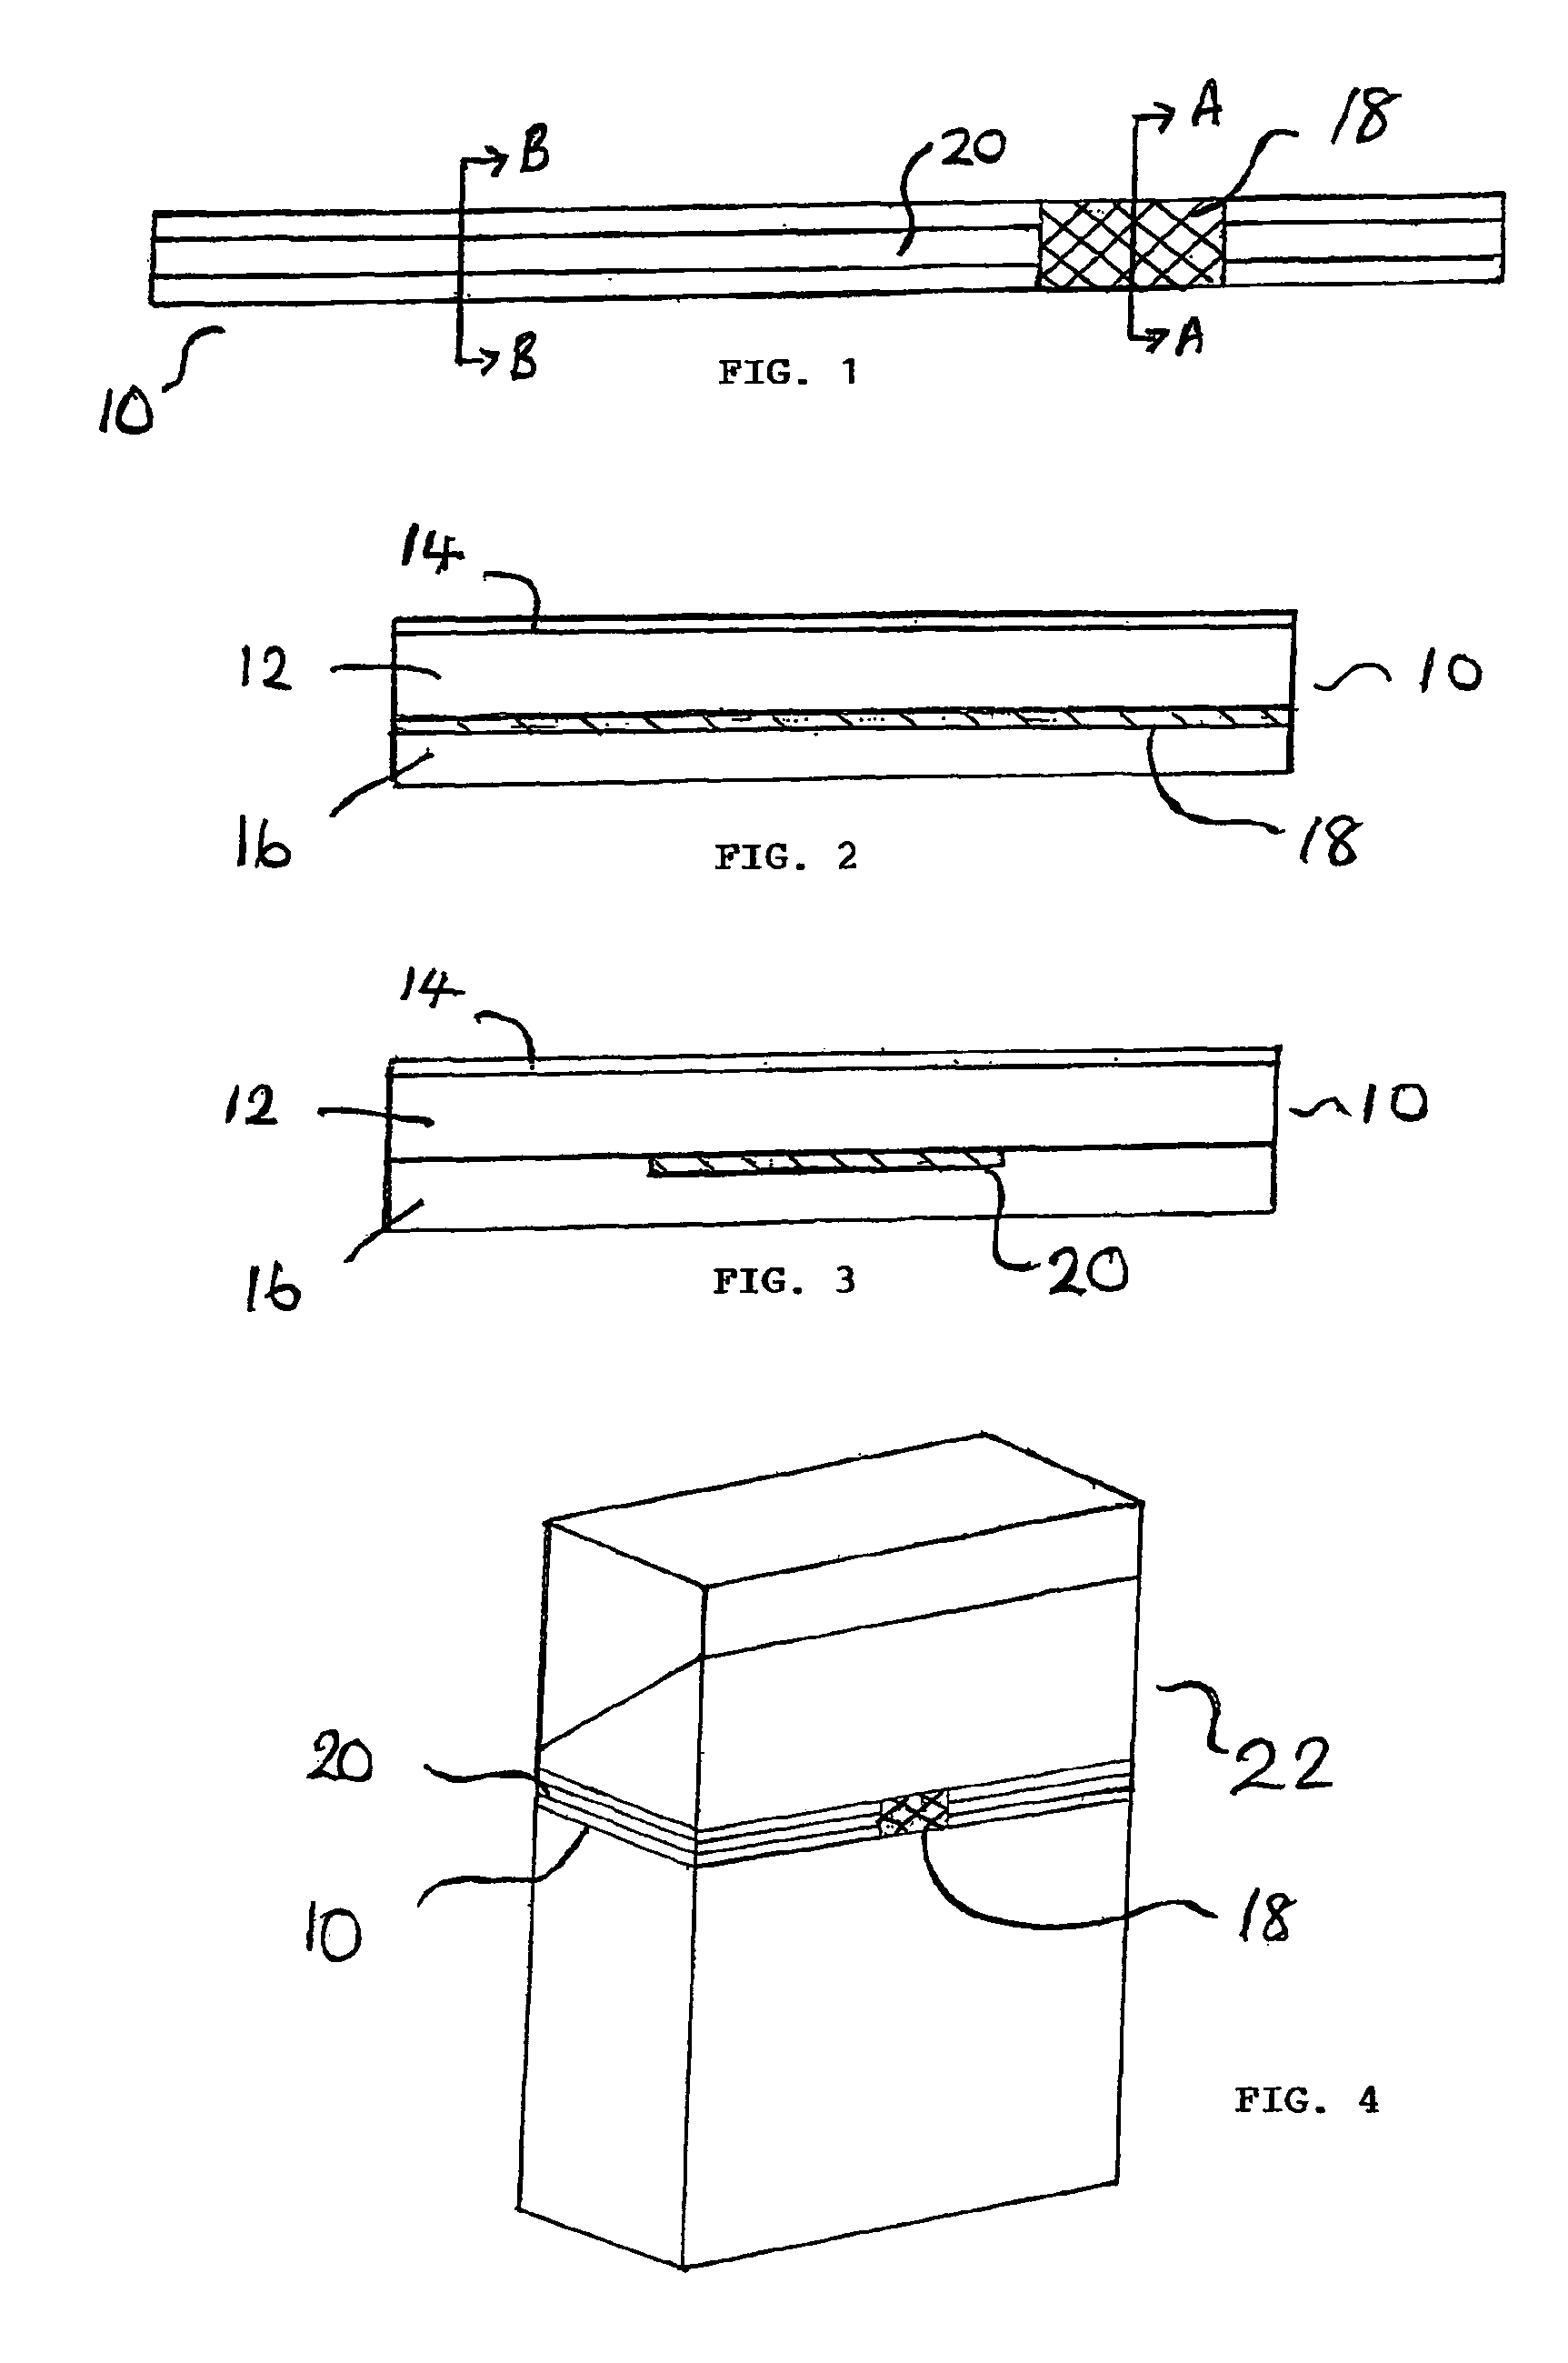 Method for applying tear tape with discrete fiscal marks for discrete packages